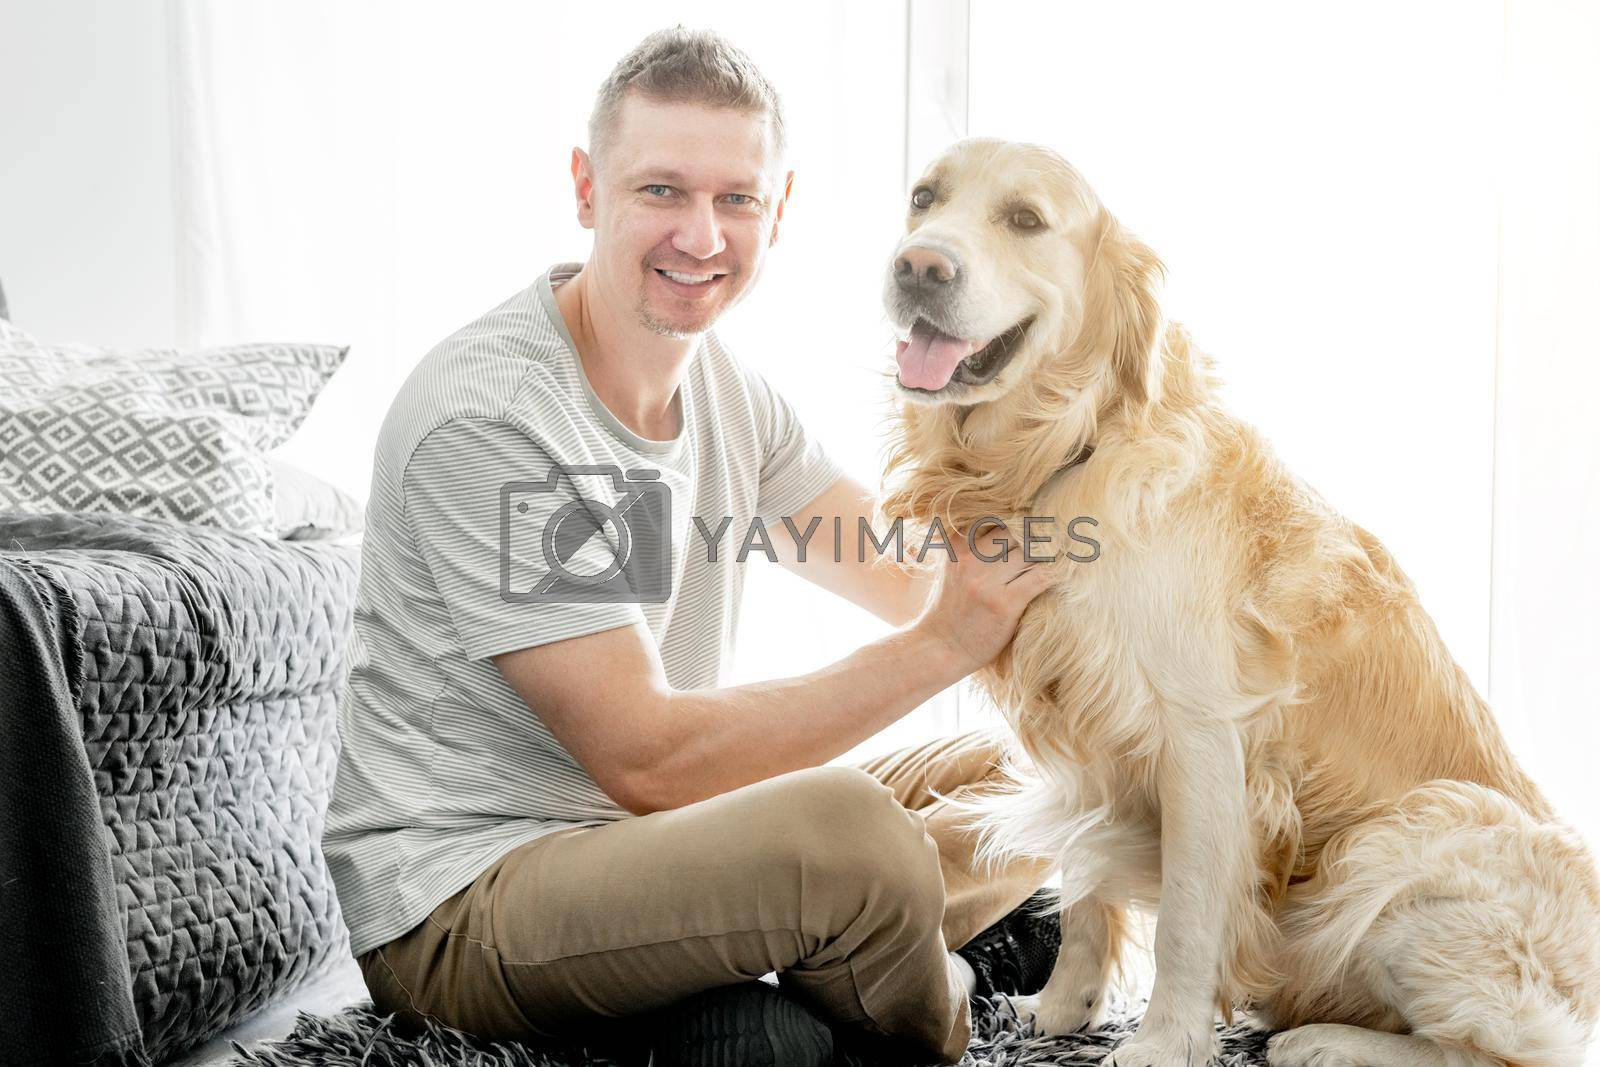 Royalty free image of Young handsome man with his golden retriever dog by tan4ikk1